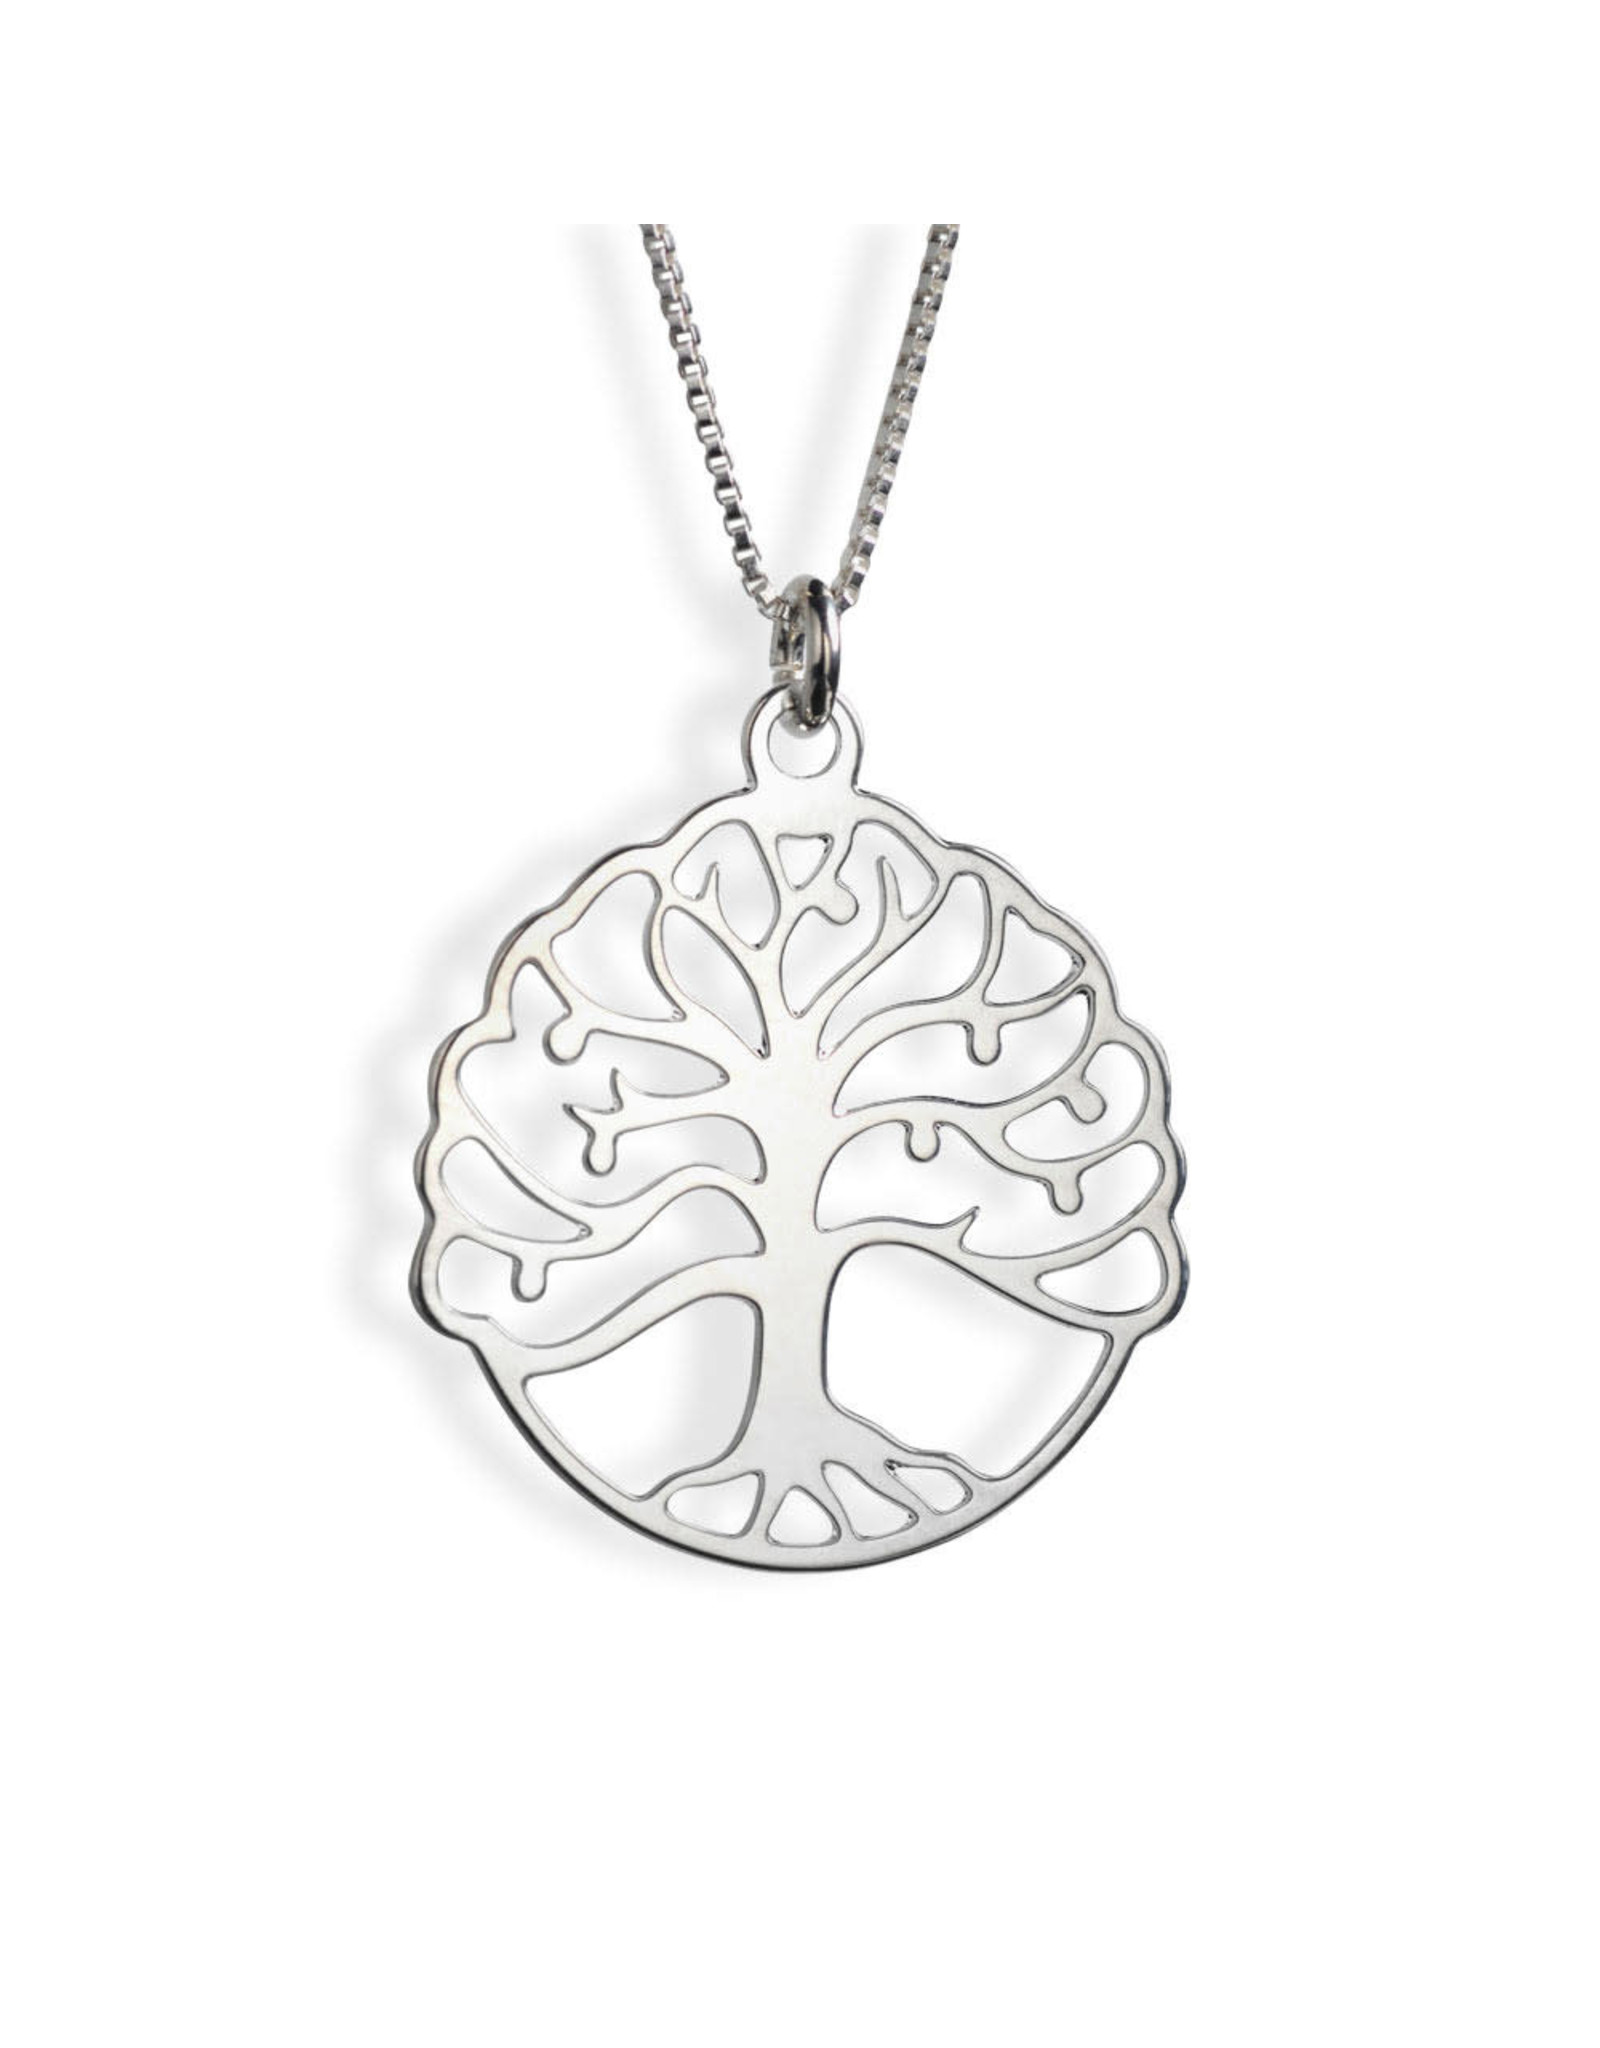 Sterling Silver Circular Tree of Life Necklace